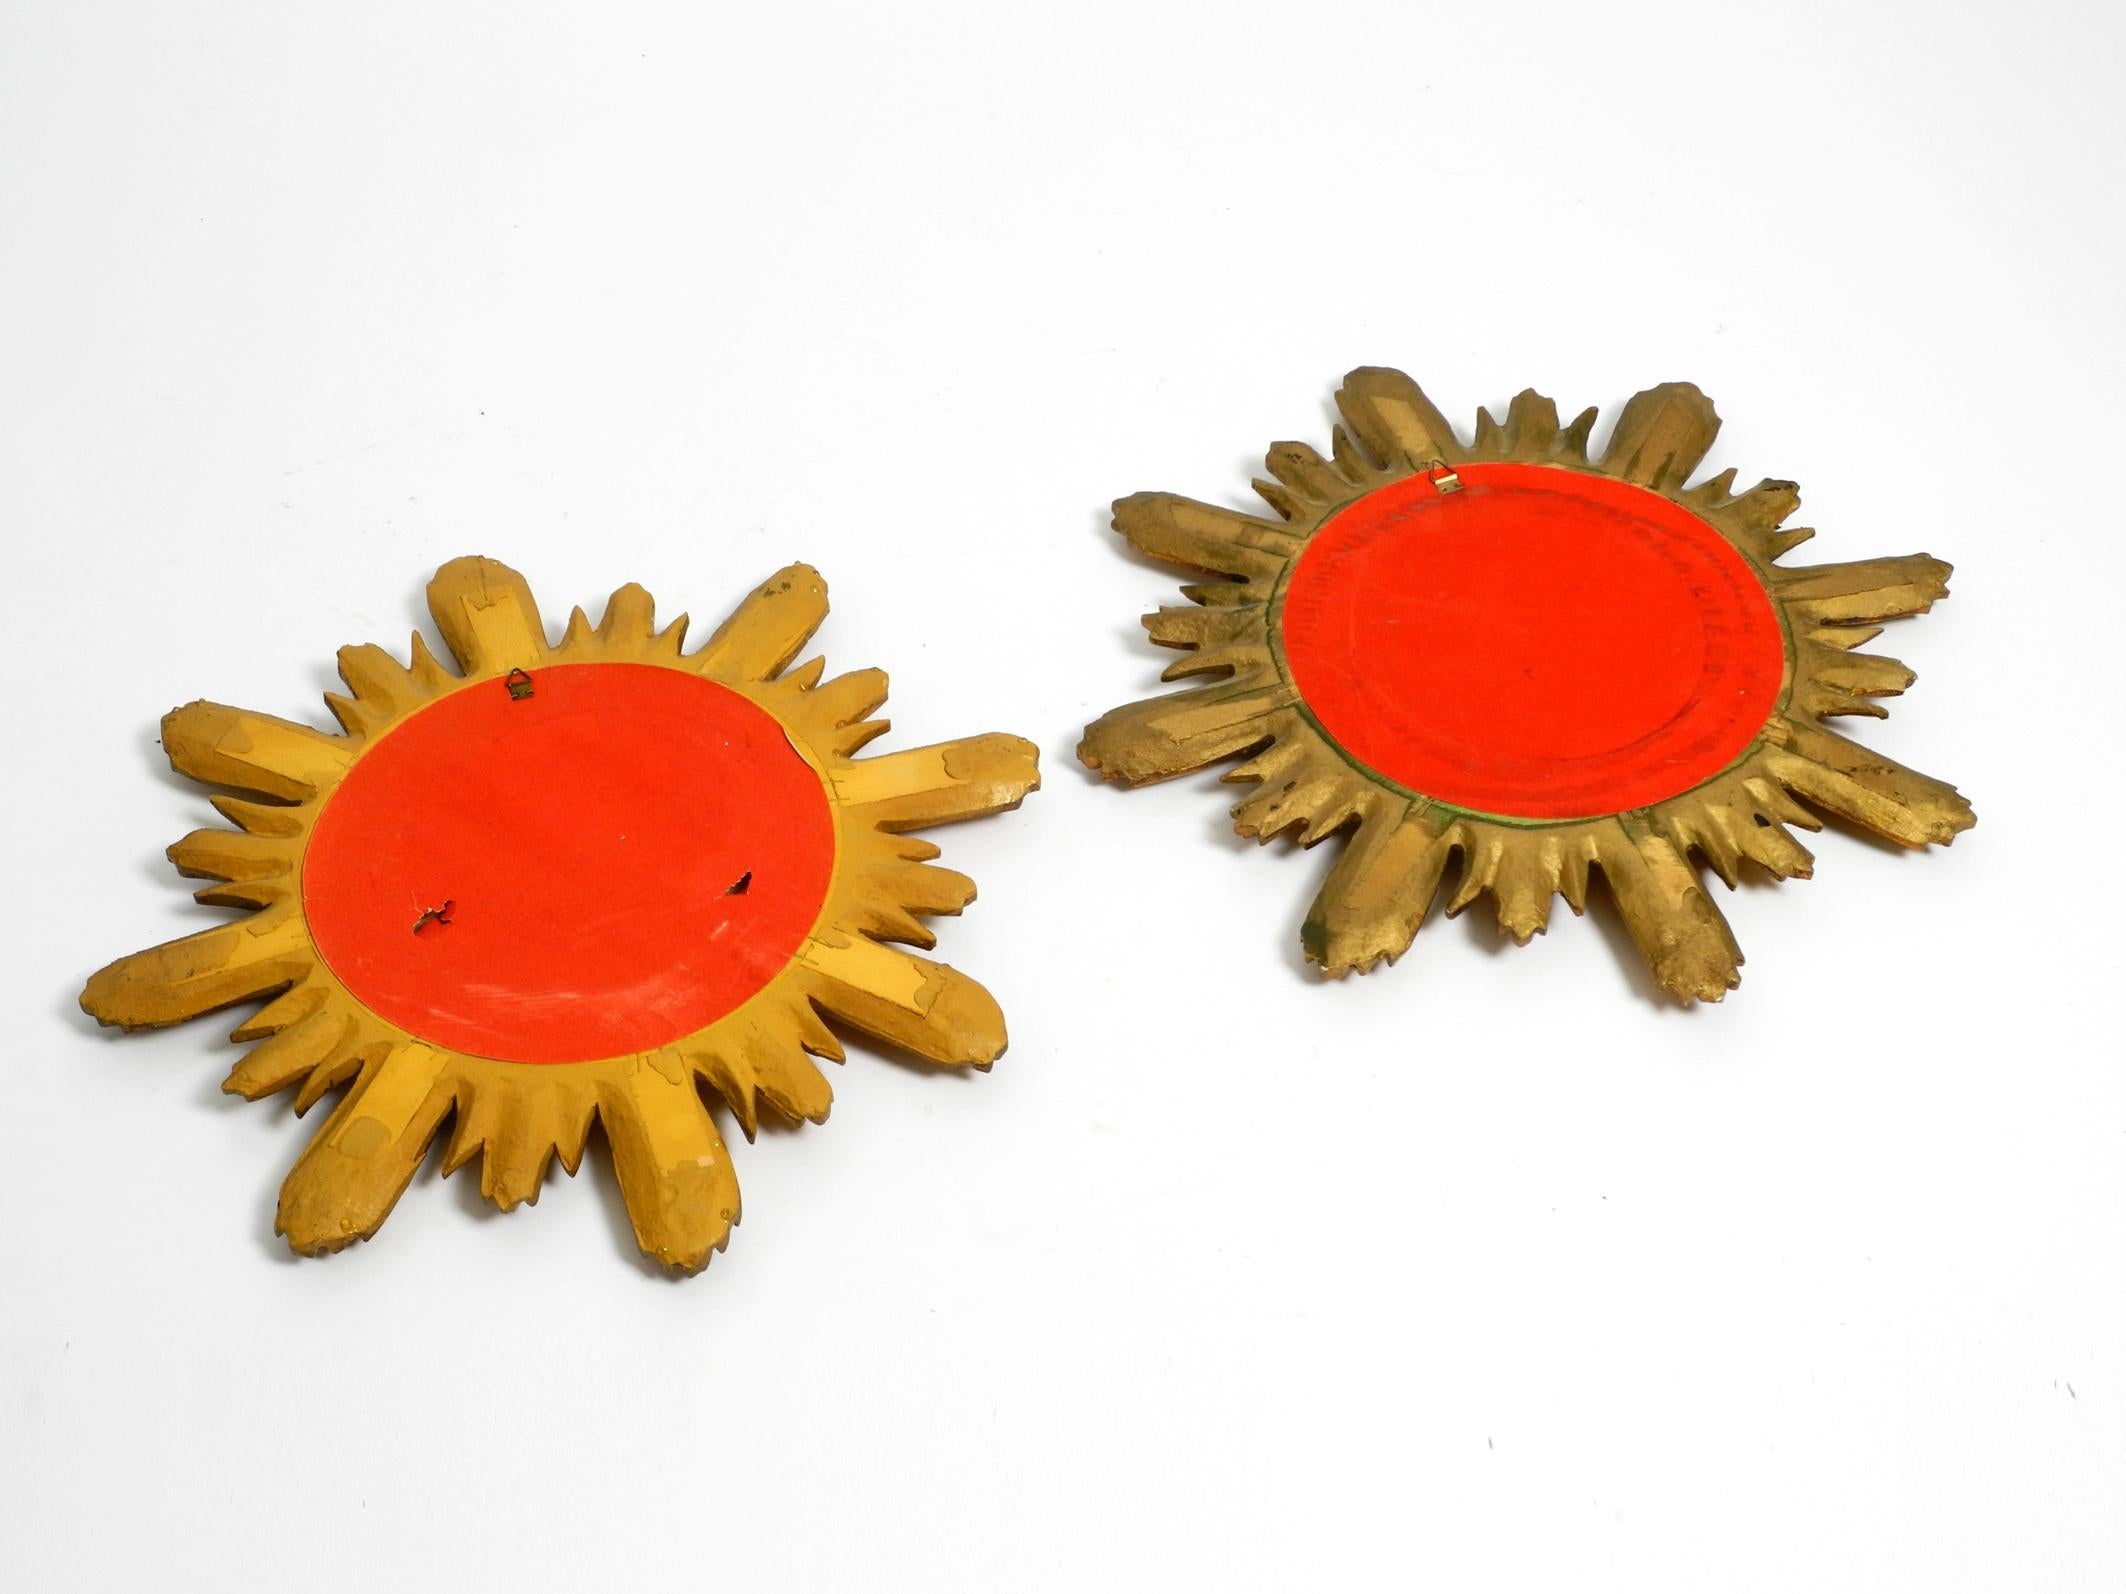 Pair of gold-plated mid-century sunburst wall mirrors made of wood and resin 4